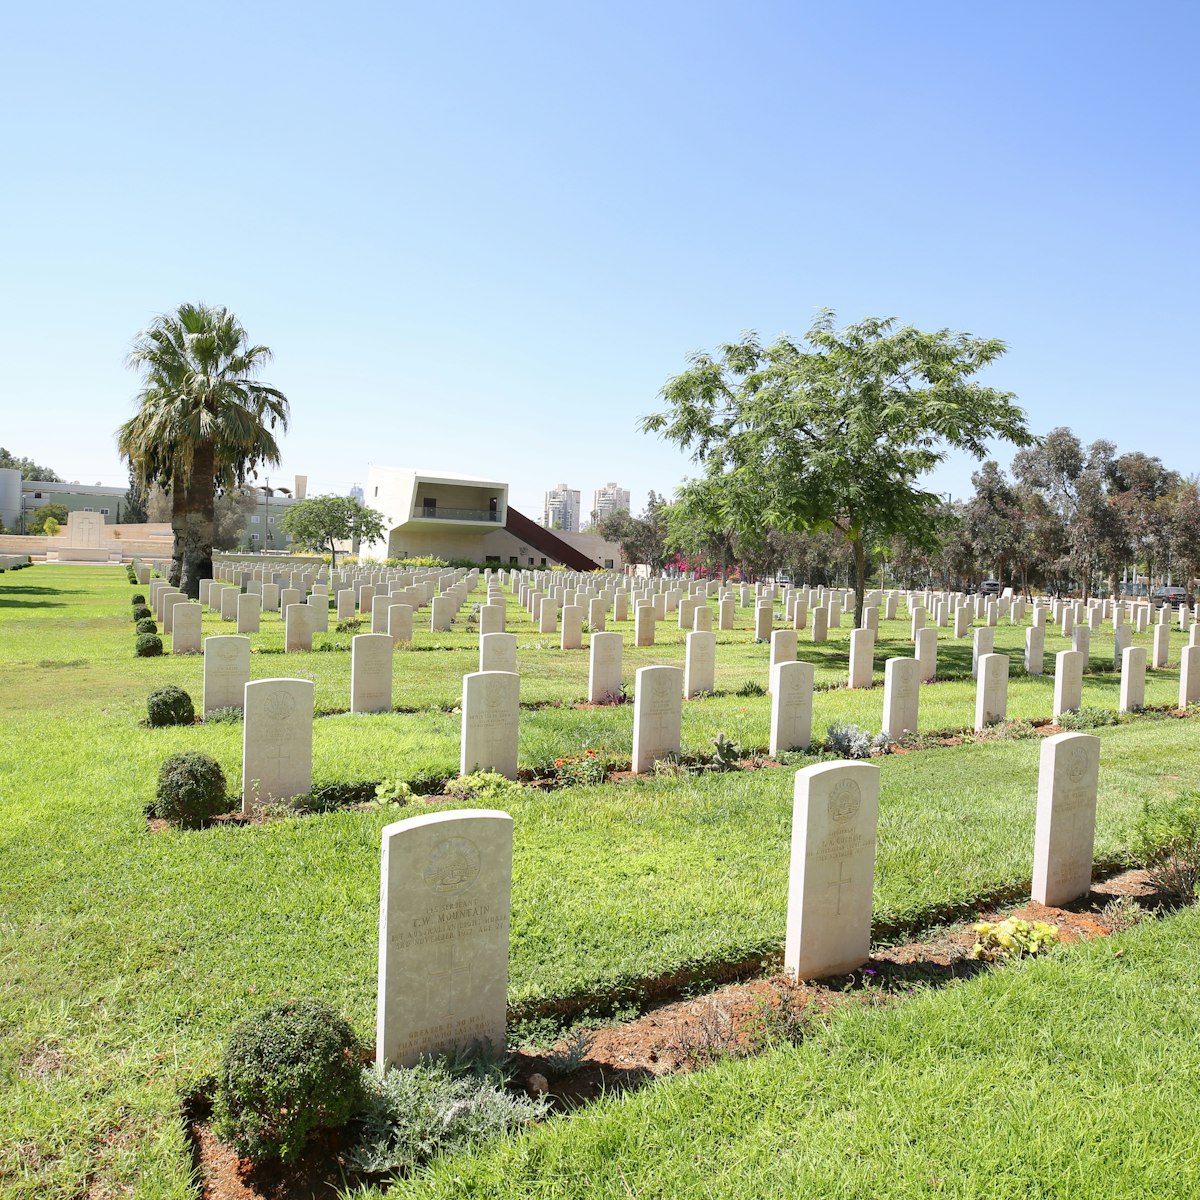 Beersheba War Cemetery, containing 1,241 Commonwealth burials of the Great War, 67 of them unidentified.